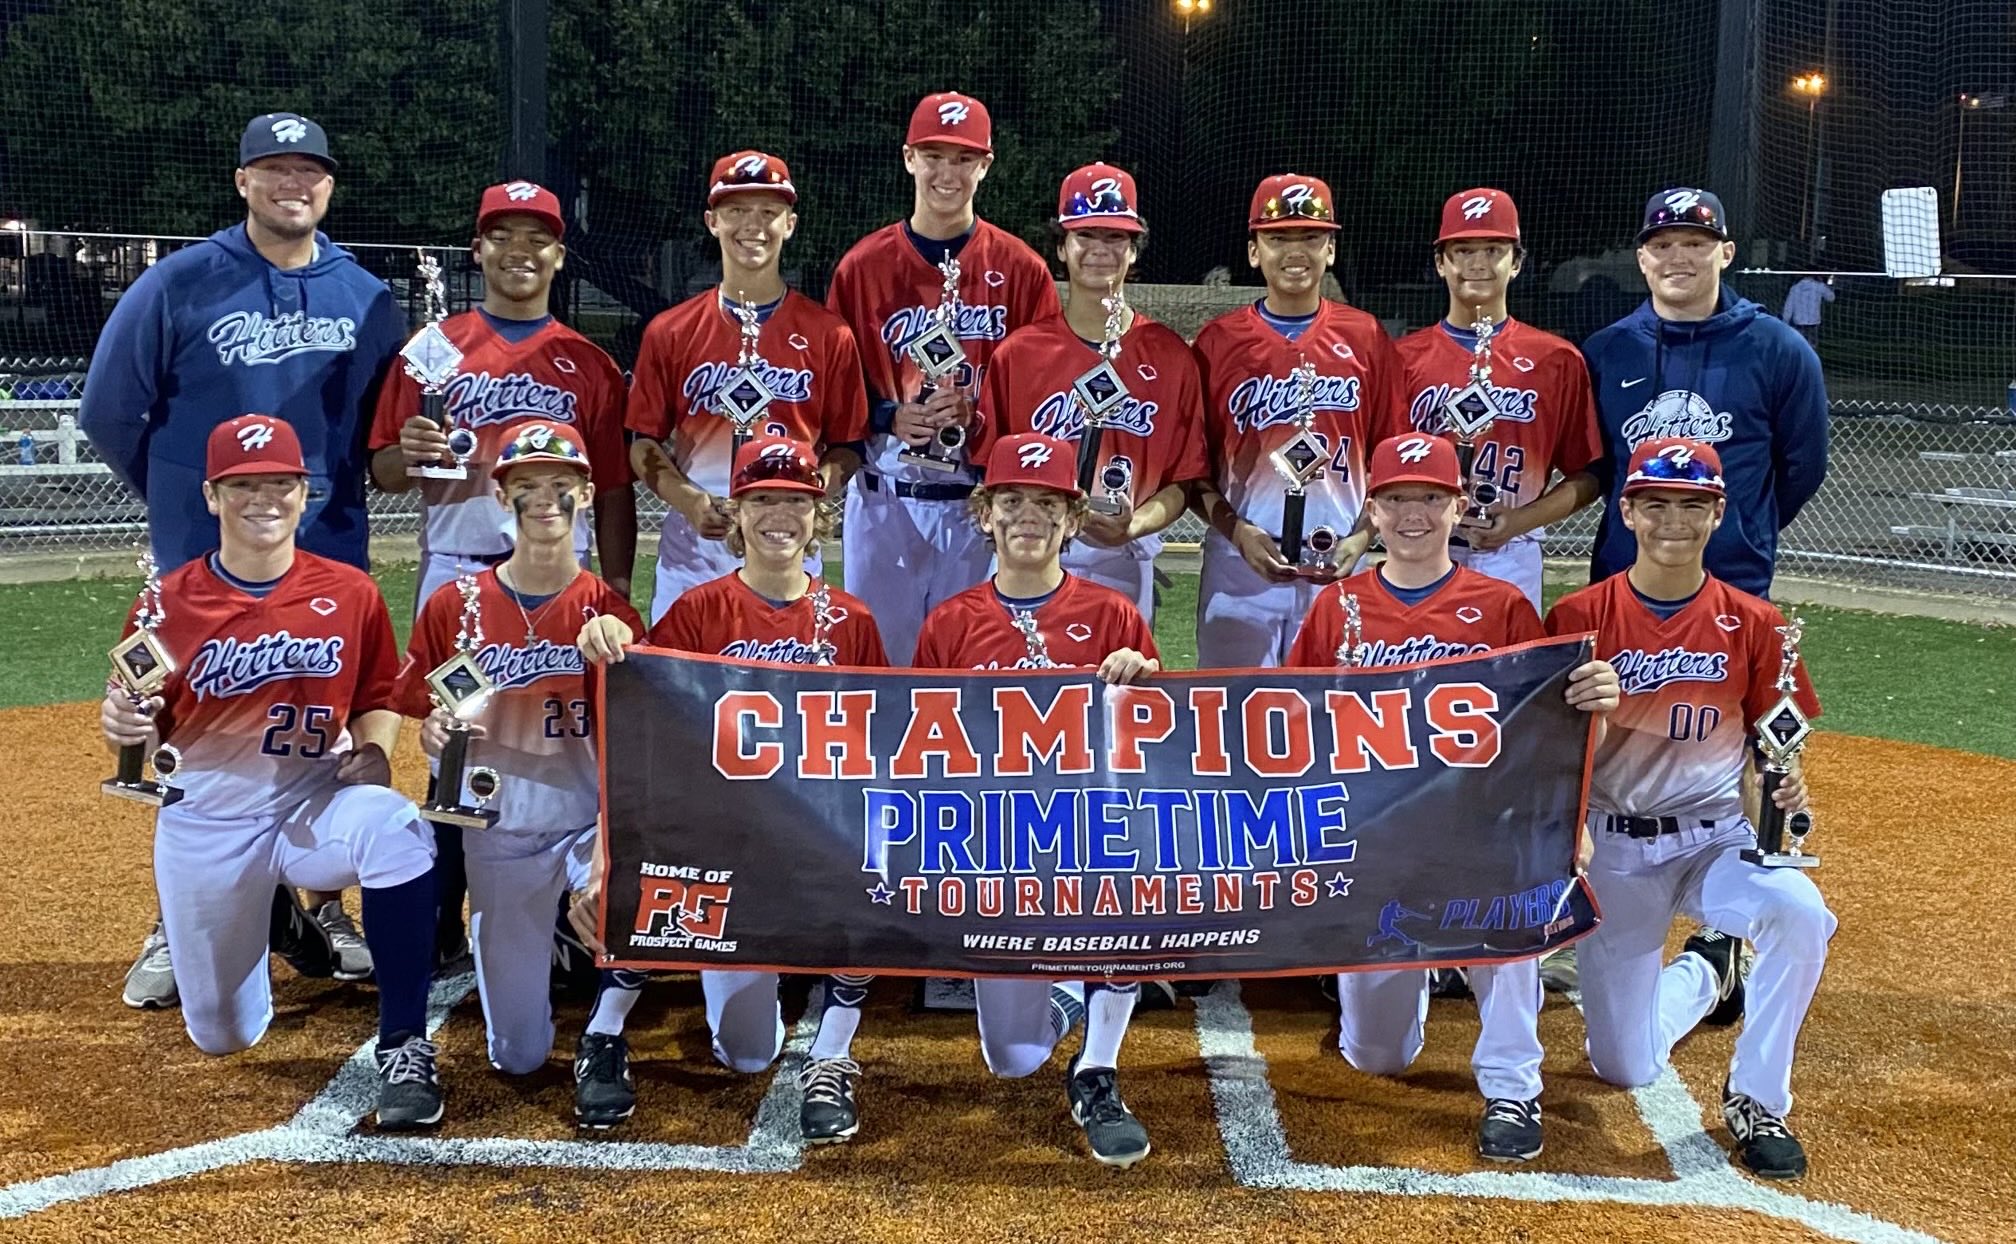 Hitters on Twitter: to U13 Navy on another title. For 3rd time this year they have short gamed the quarter semi and final game. Special group way to